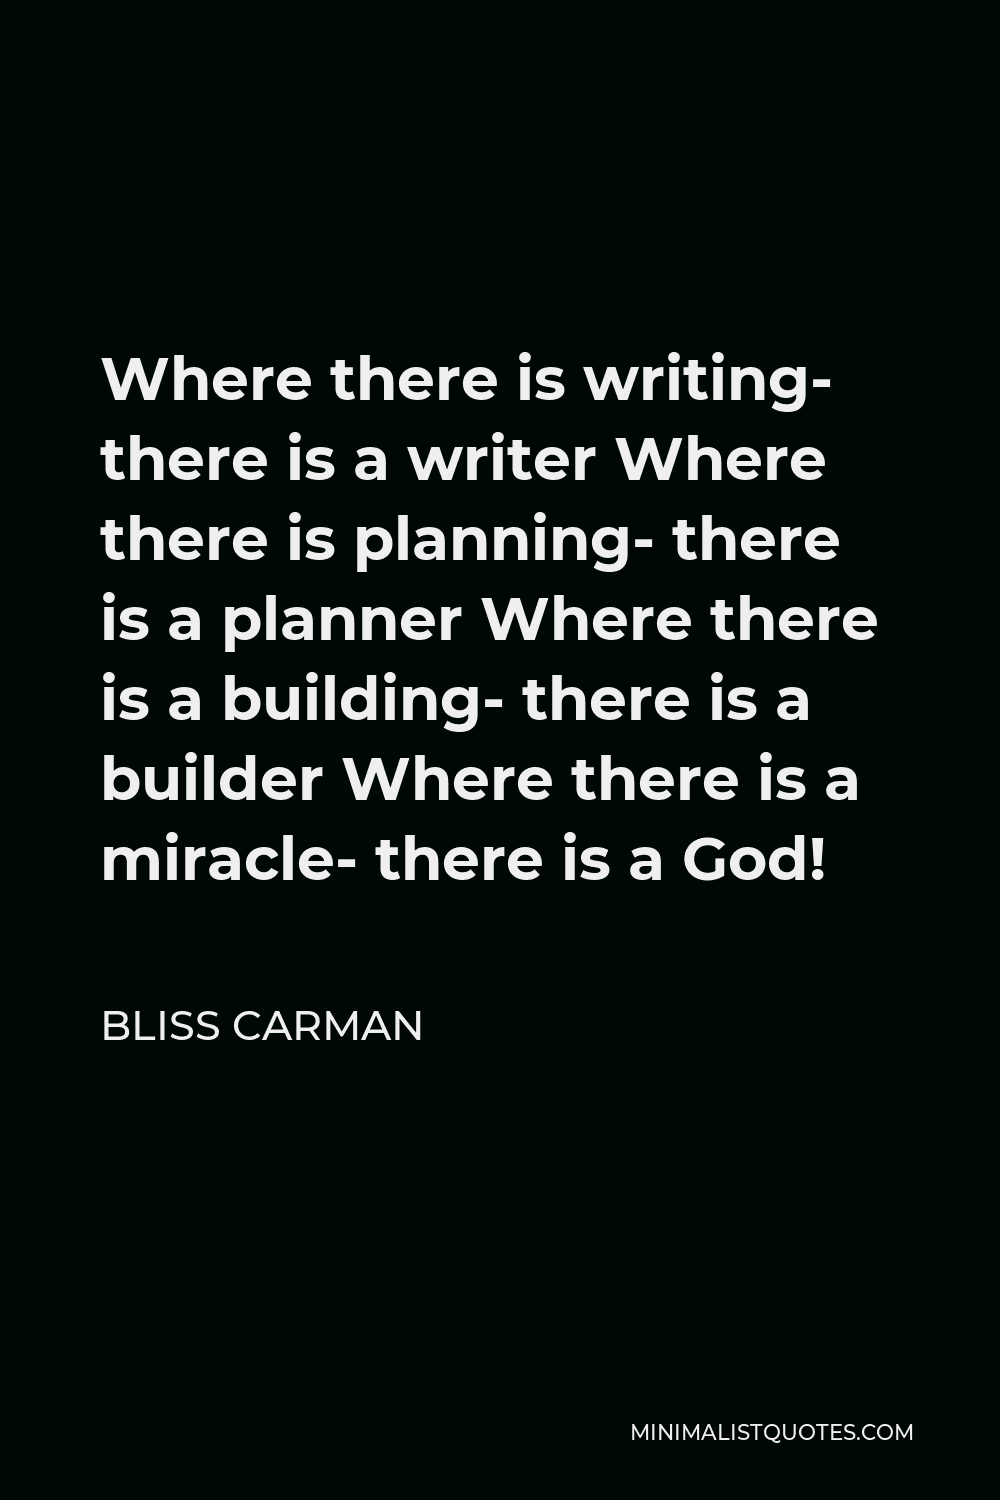 Bliss Carman Quote - Where there is writing- there is a writer Where there is planning- there is a planner Where there is a building- there is a builder Where there is a miracle- there is a God!